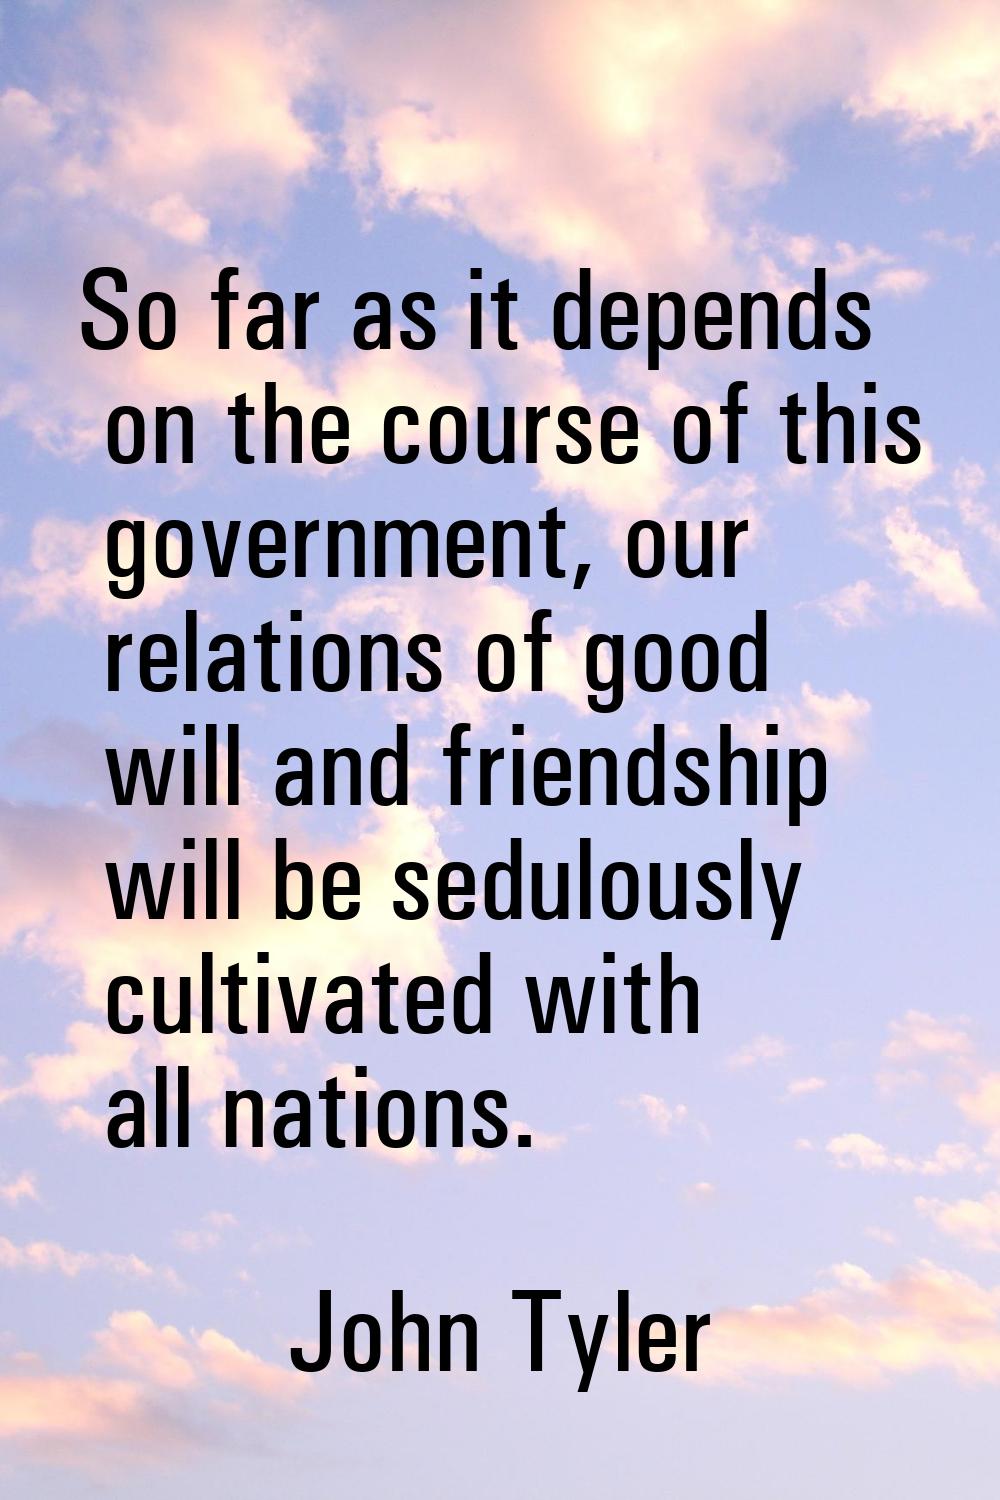 So far as it depends on the course of this government, our relations of good will and friendship wi